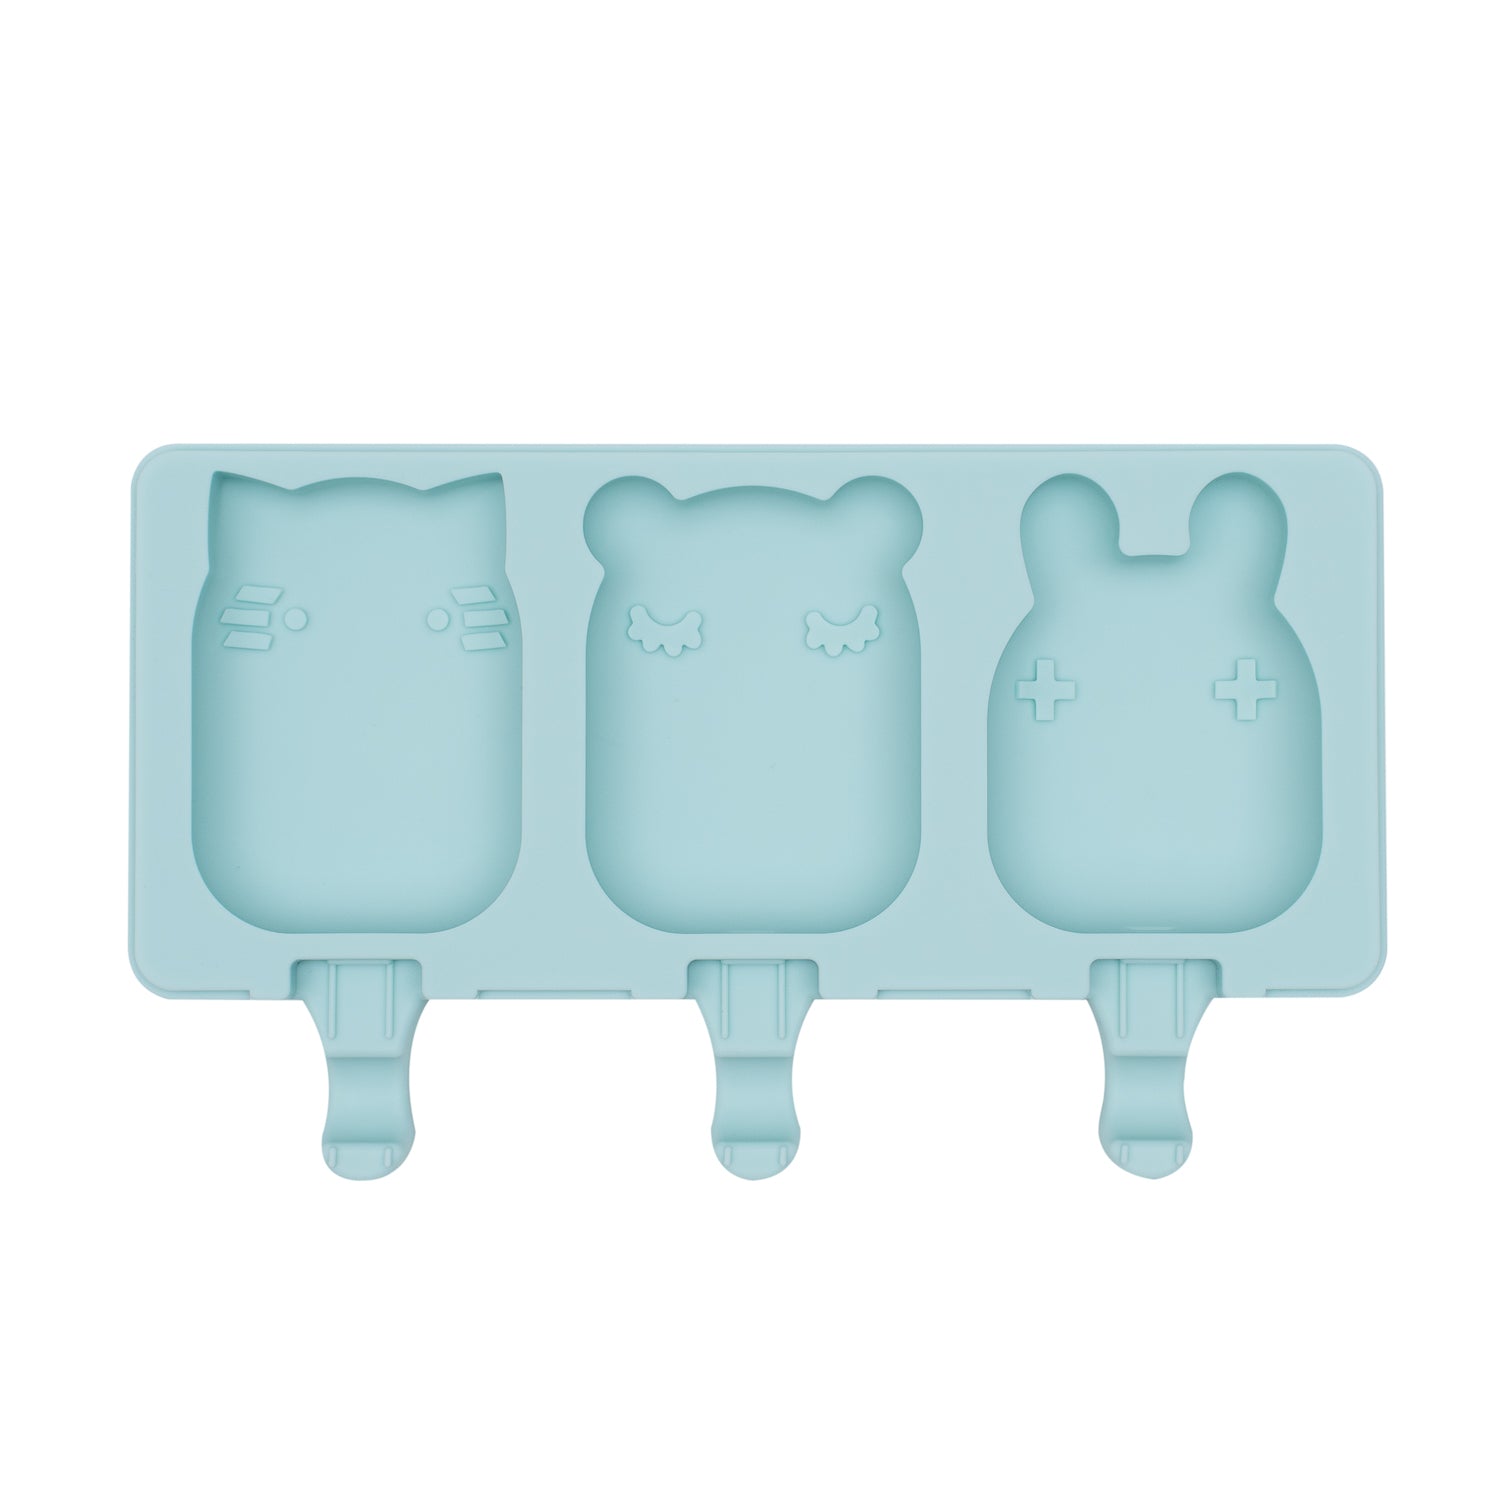 Frosties Icy pole Mould - Minty Green